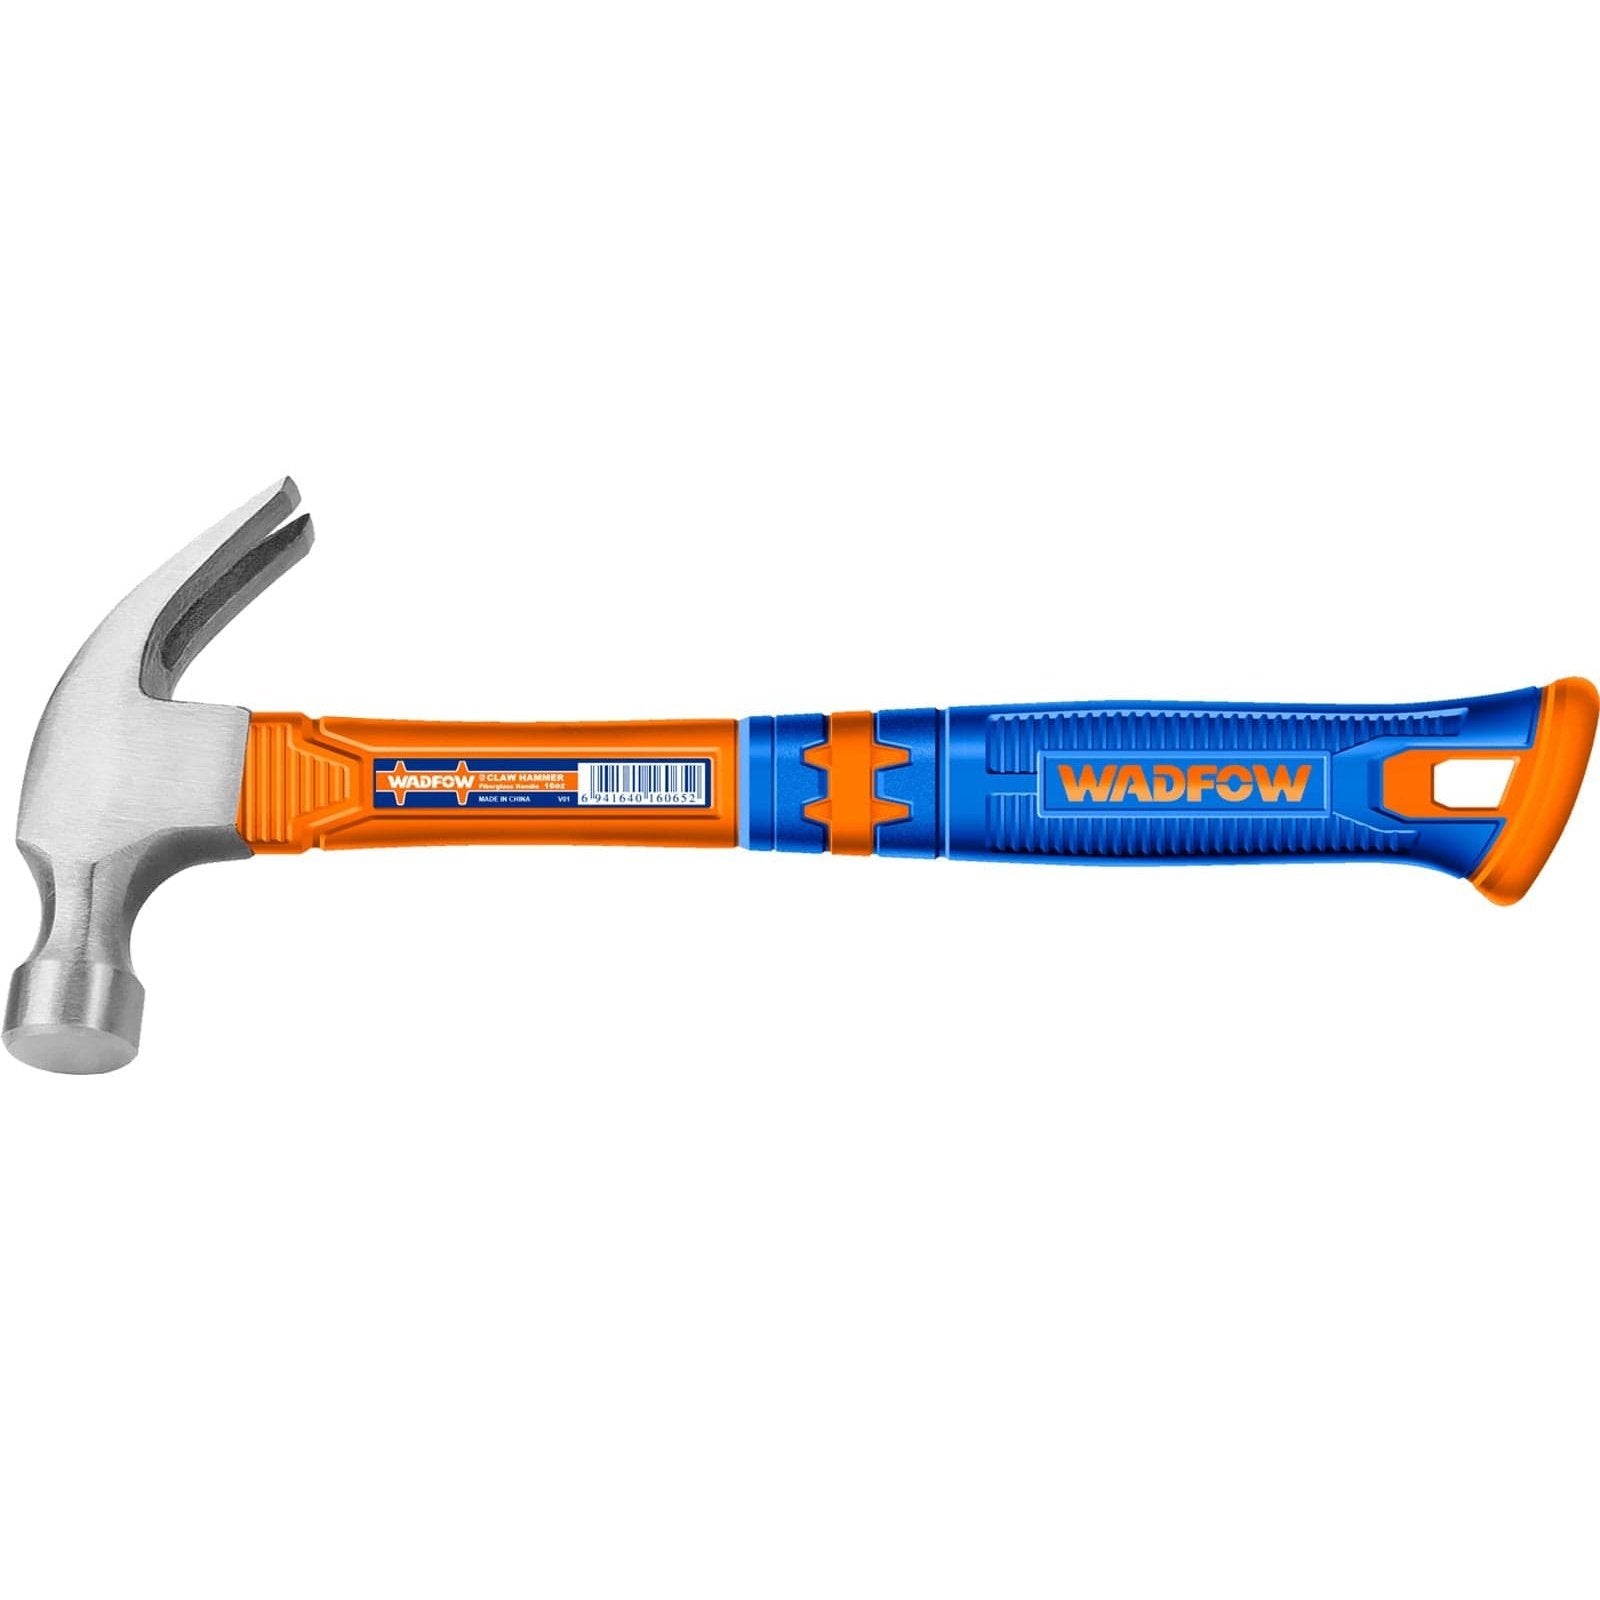 Ingco Claw Hammer - 220g, 450g & 560g - Buy Online in Accra, Ghana at Supply Master Hammers Mallets & Sledges Buy Tools hardware Building materials